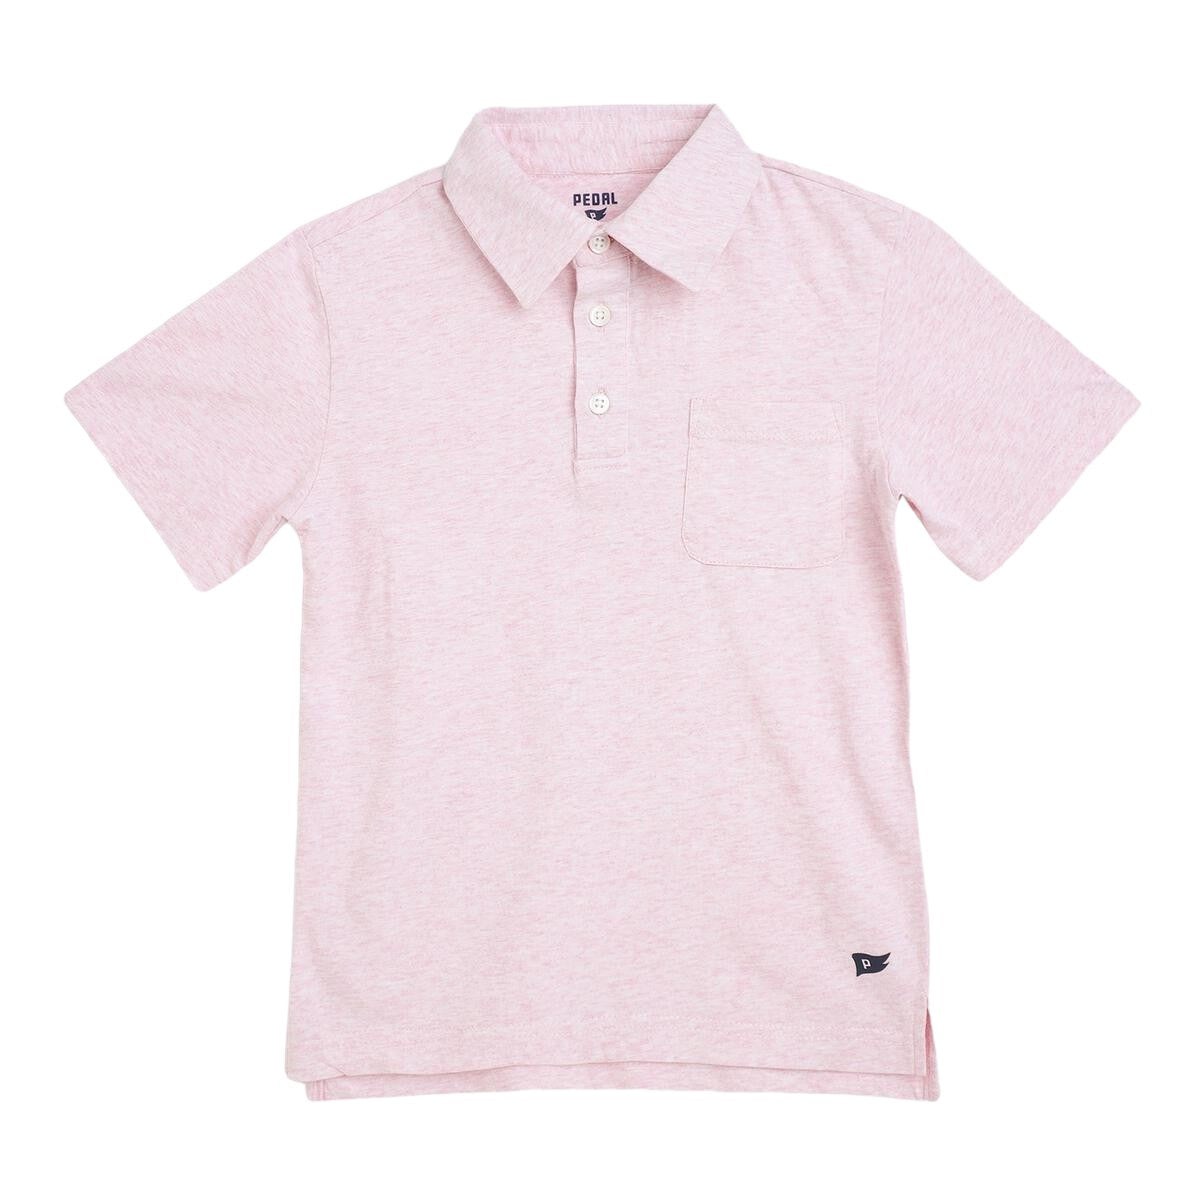 Pedal Pink Performance Heather Polo 33168 5103